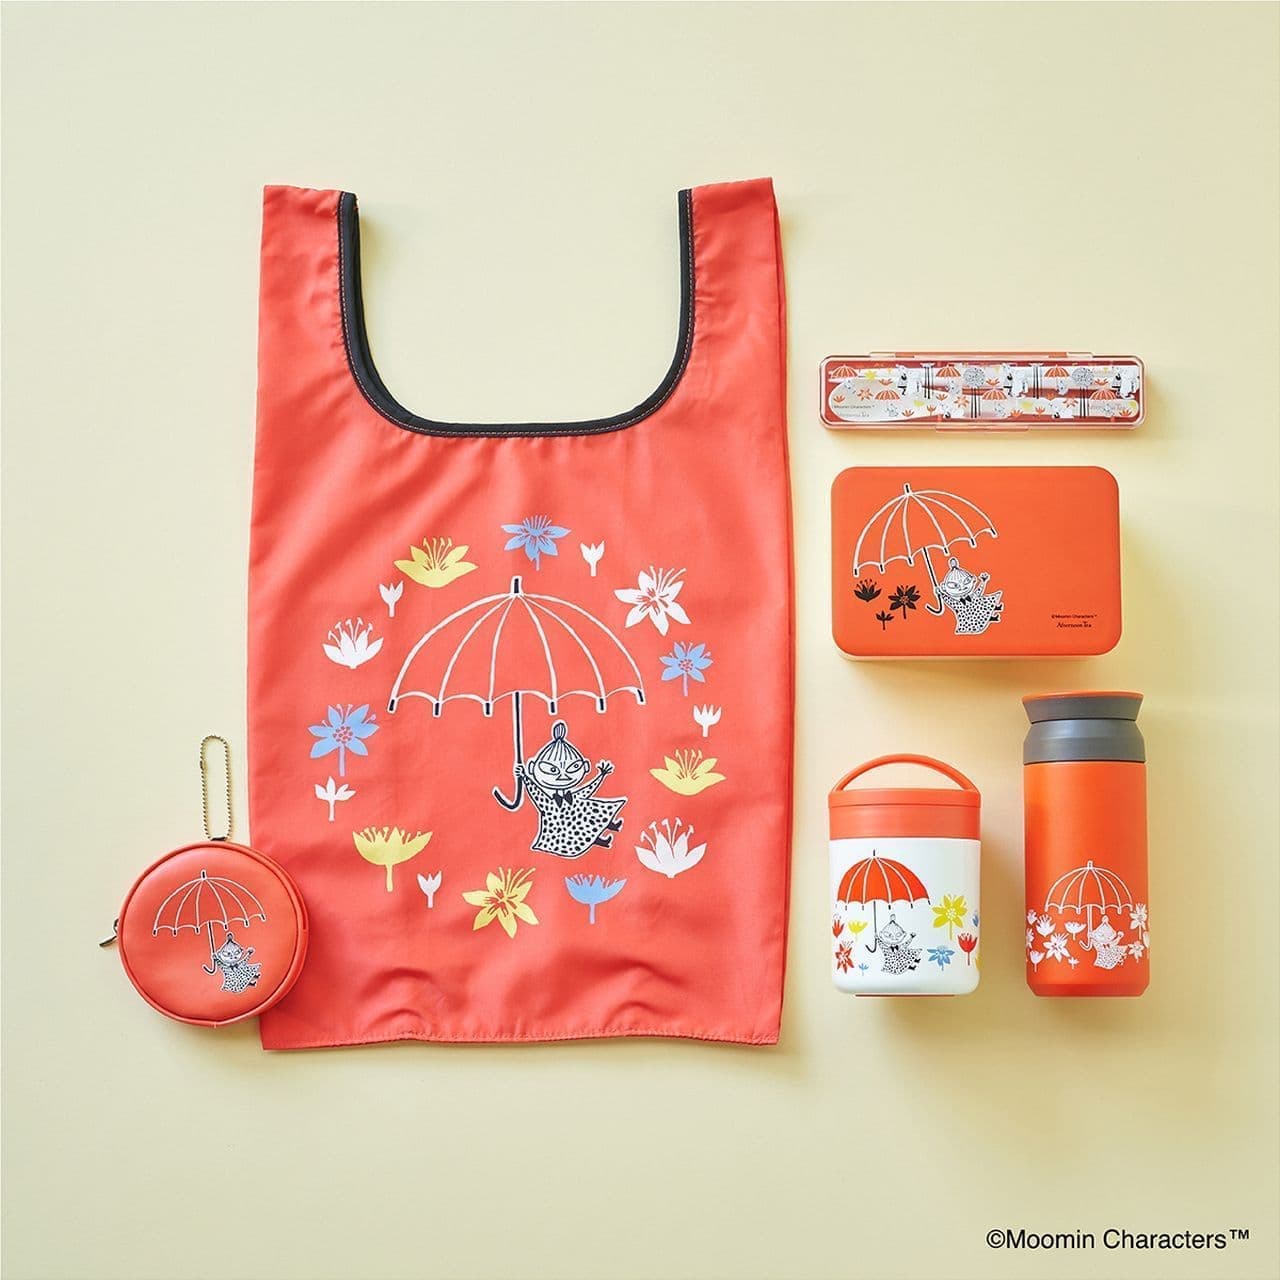 Afternoon Tea LIVING Moomin picture book design "LITTLE MY collection" summer items